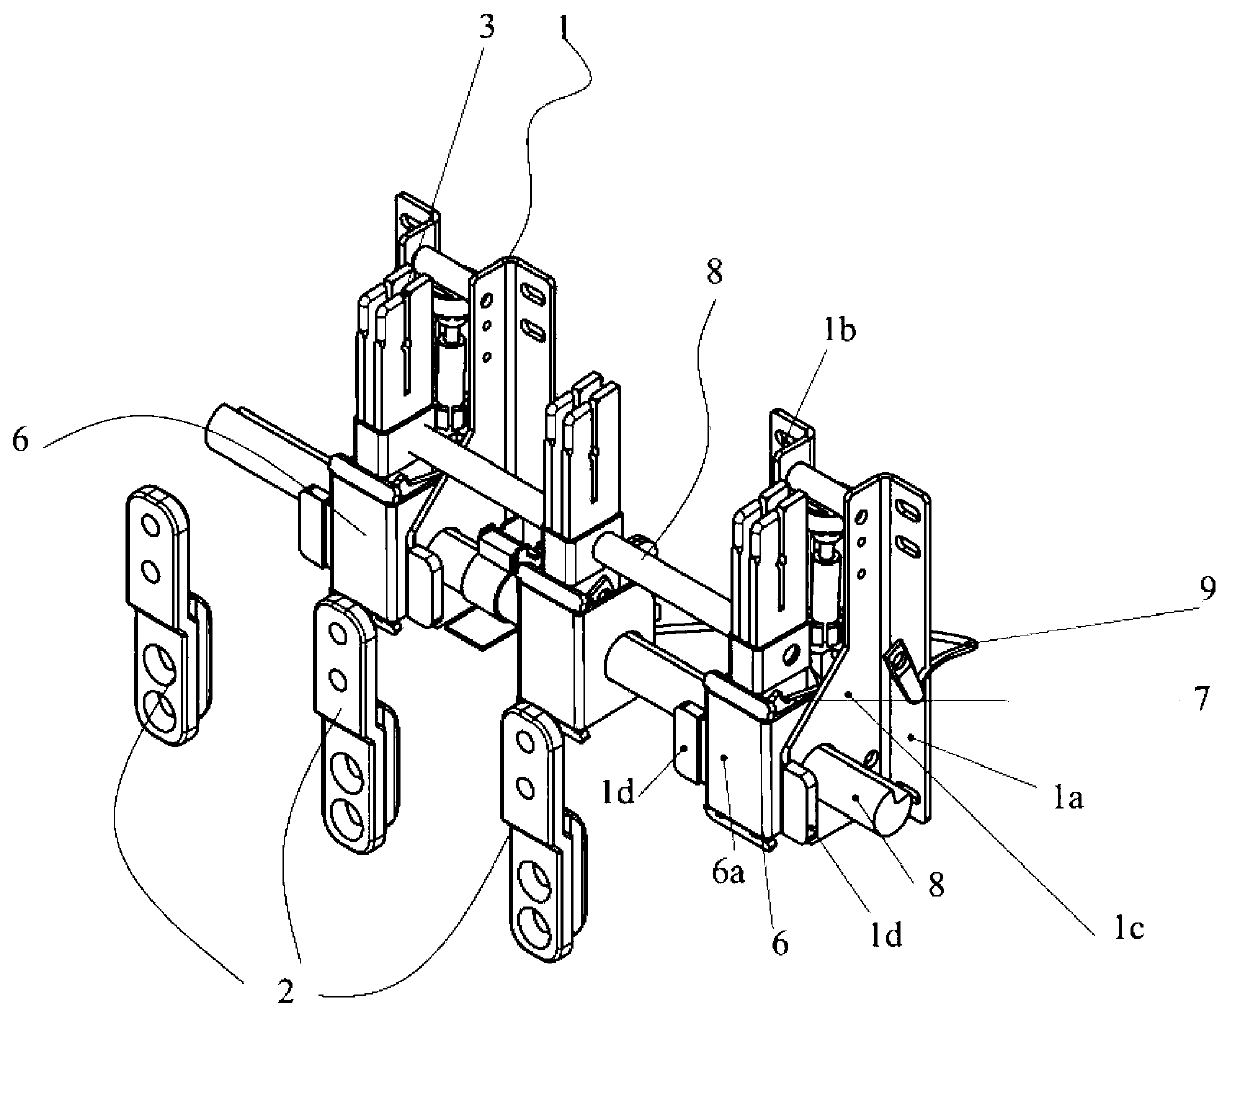 Earthing switch device